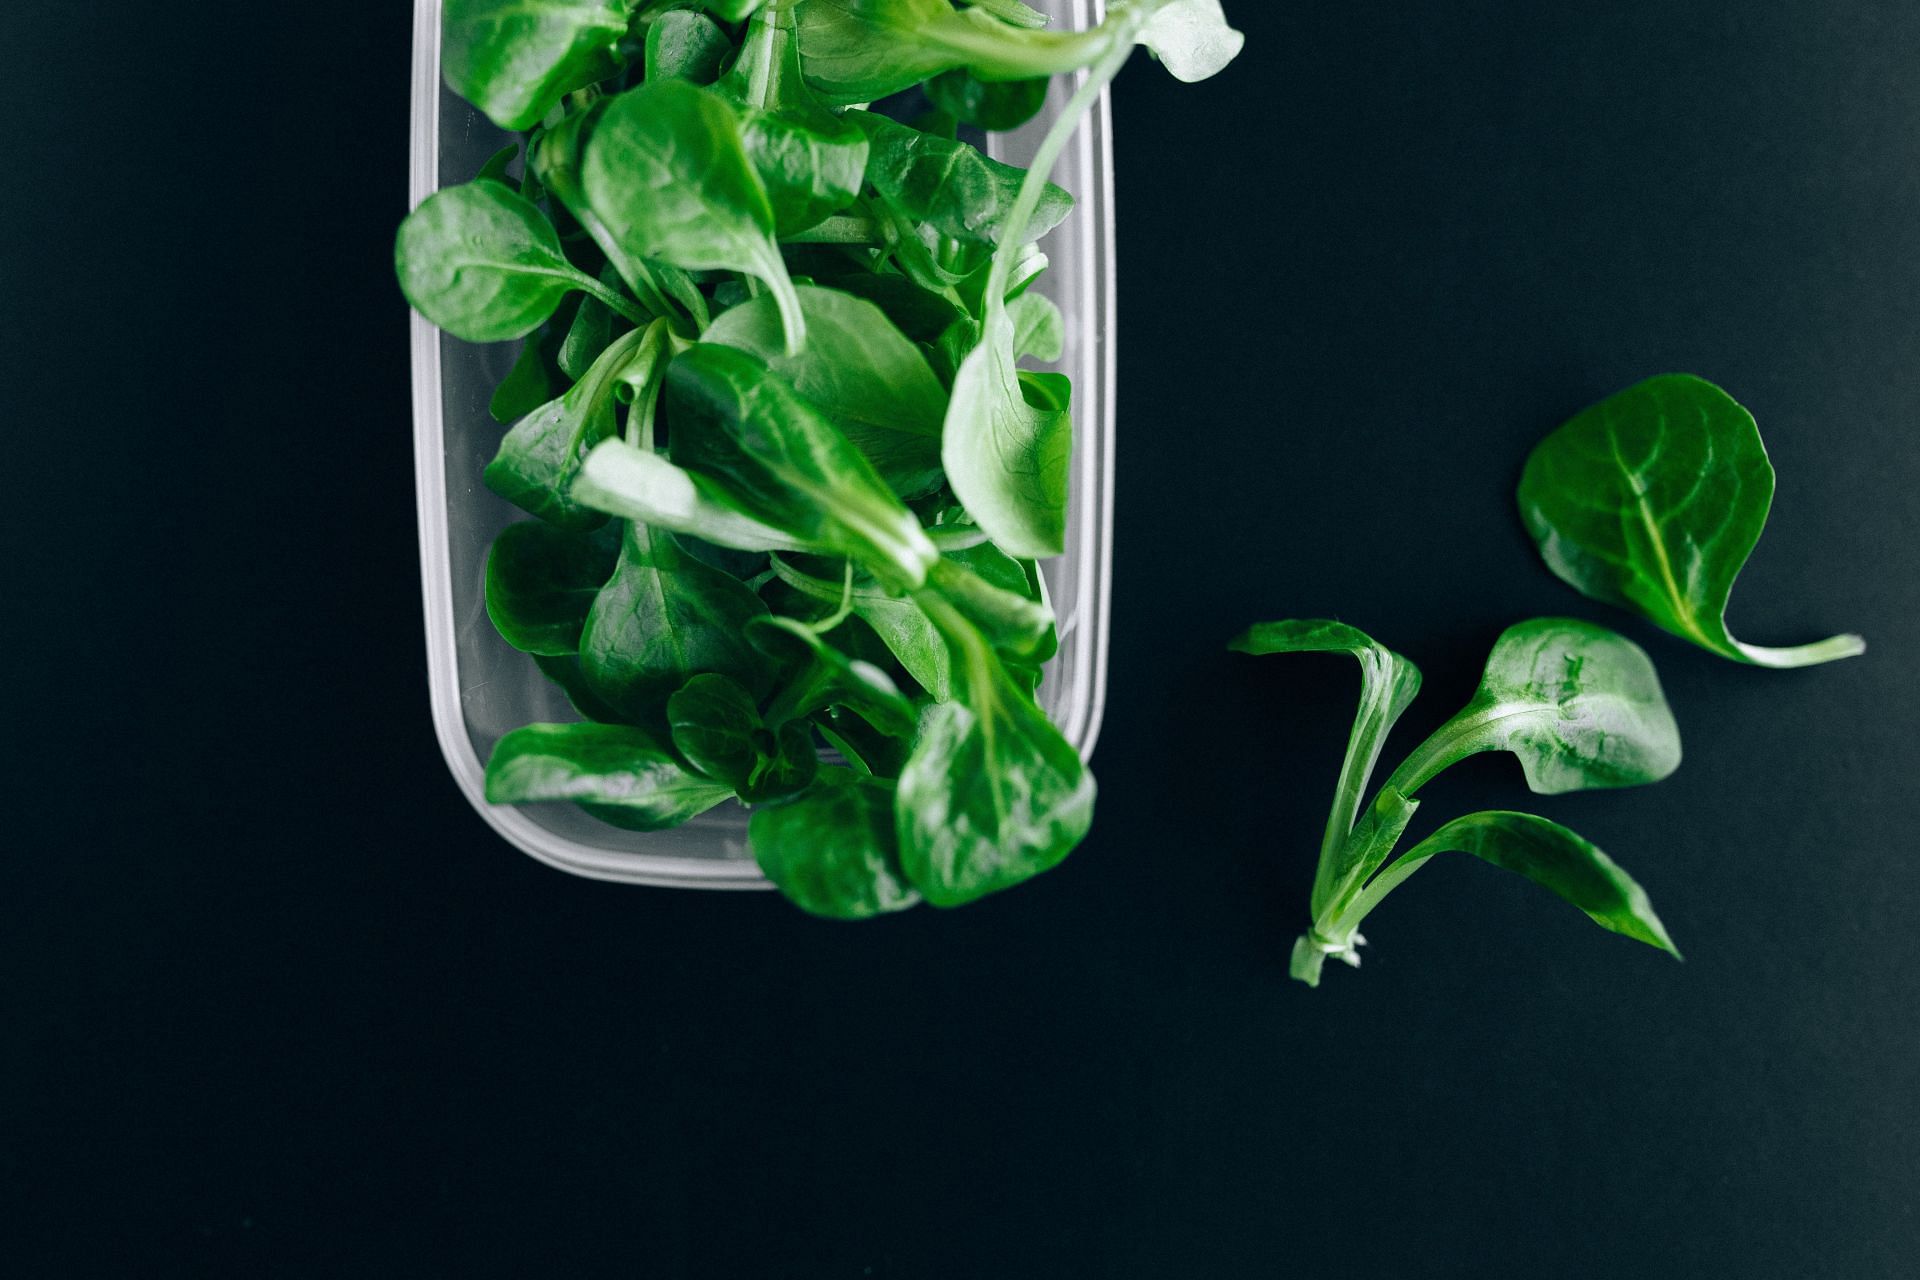 Leafy greens help increase the production of white blood cells and enhance the immune system